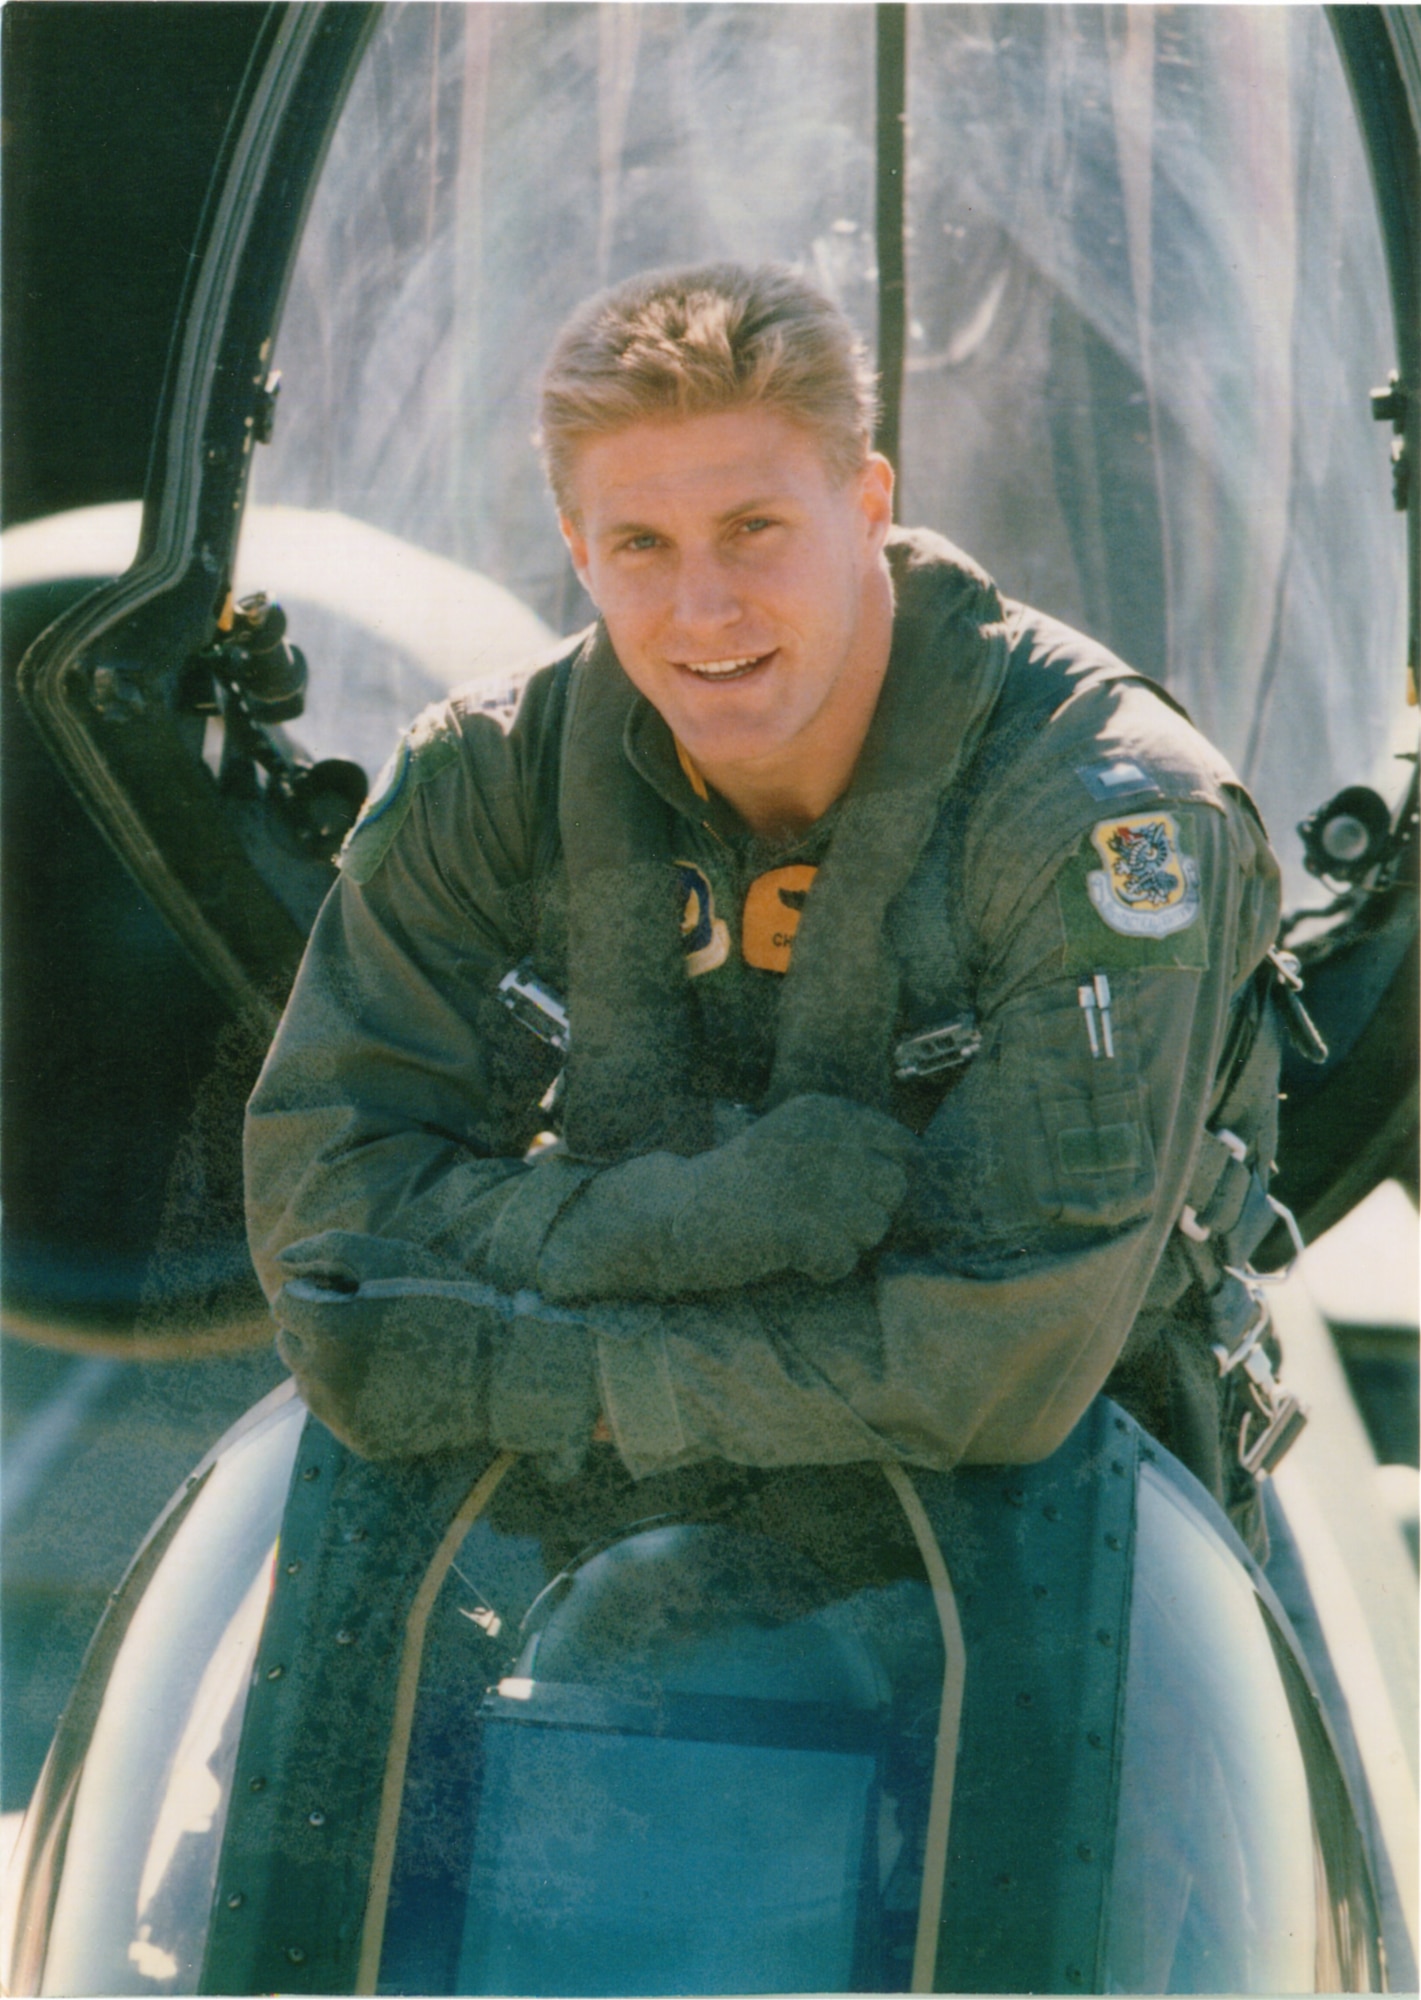 1st Lt. Chad Hennings poses for a photo in the cockpit of his A-10 Thunderbolt II during his time in service, from 1988 to 1992. Hennings seperated from the Air Force in 1992 at the rank of captain. He served in Operations Desert Storm and Provide Comfort, a a humanitarian effort which provided relief and aid to Kurdish refugees in Northern Iraq. (Courtesy Photo)